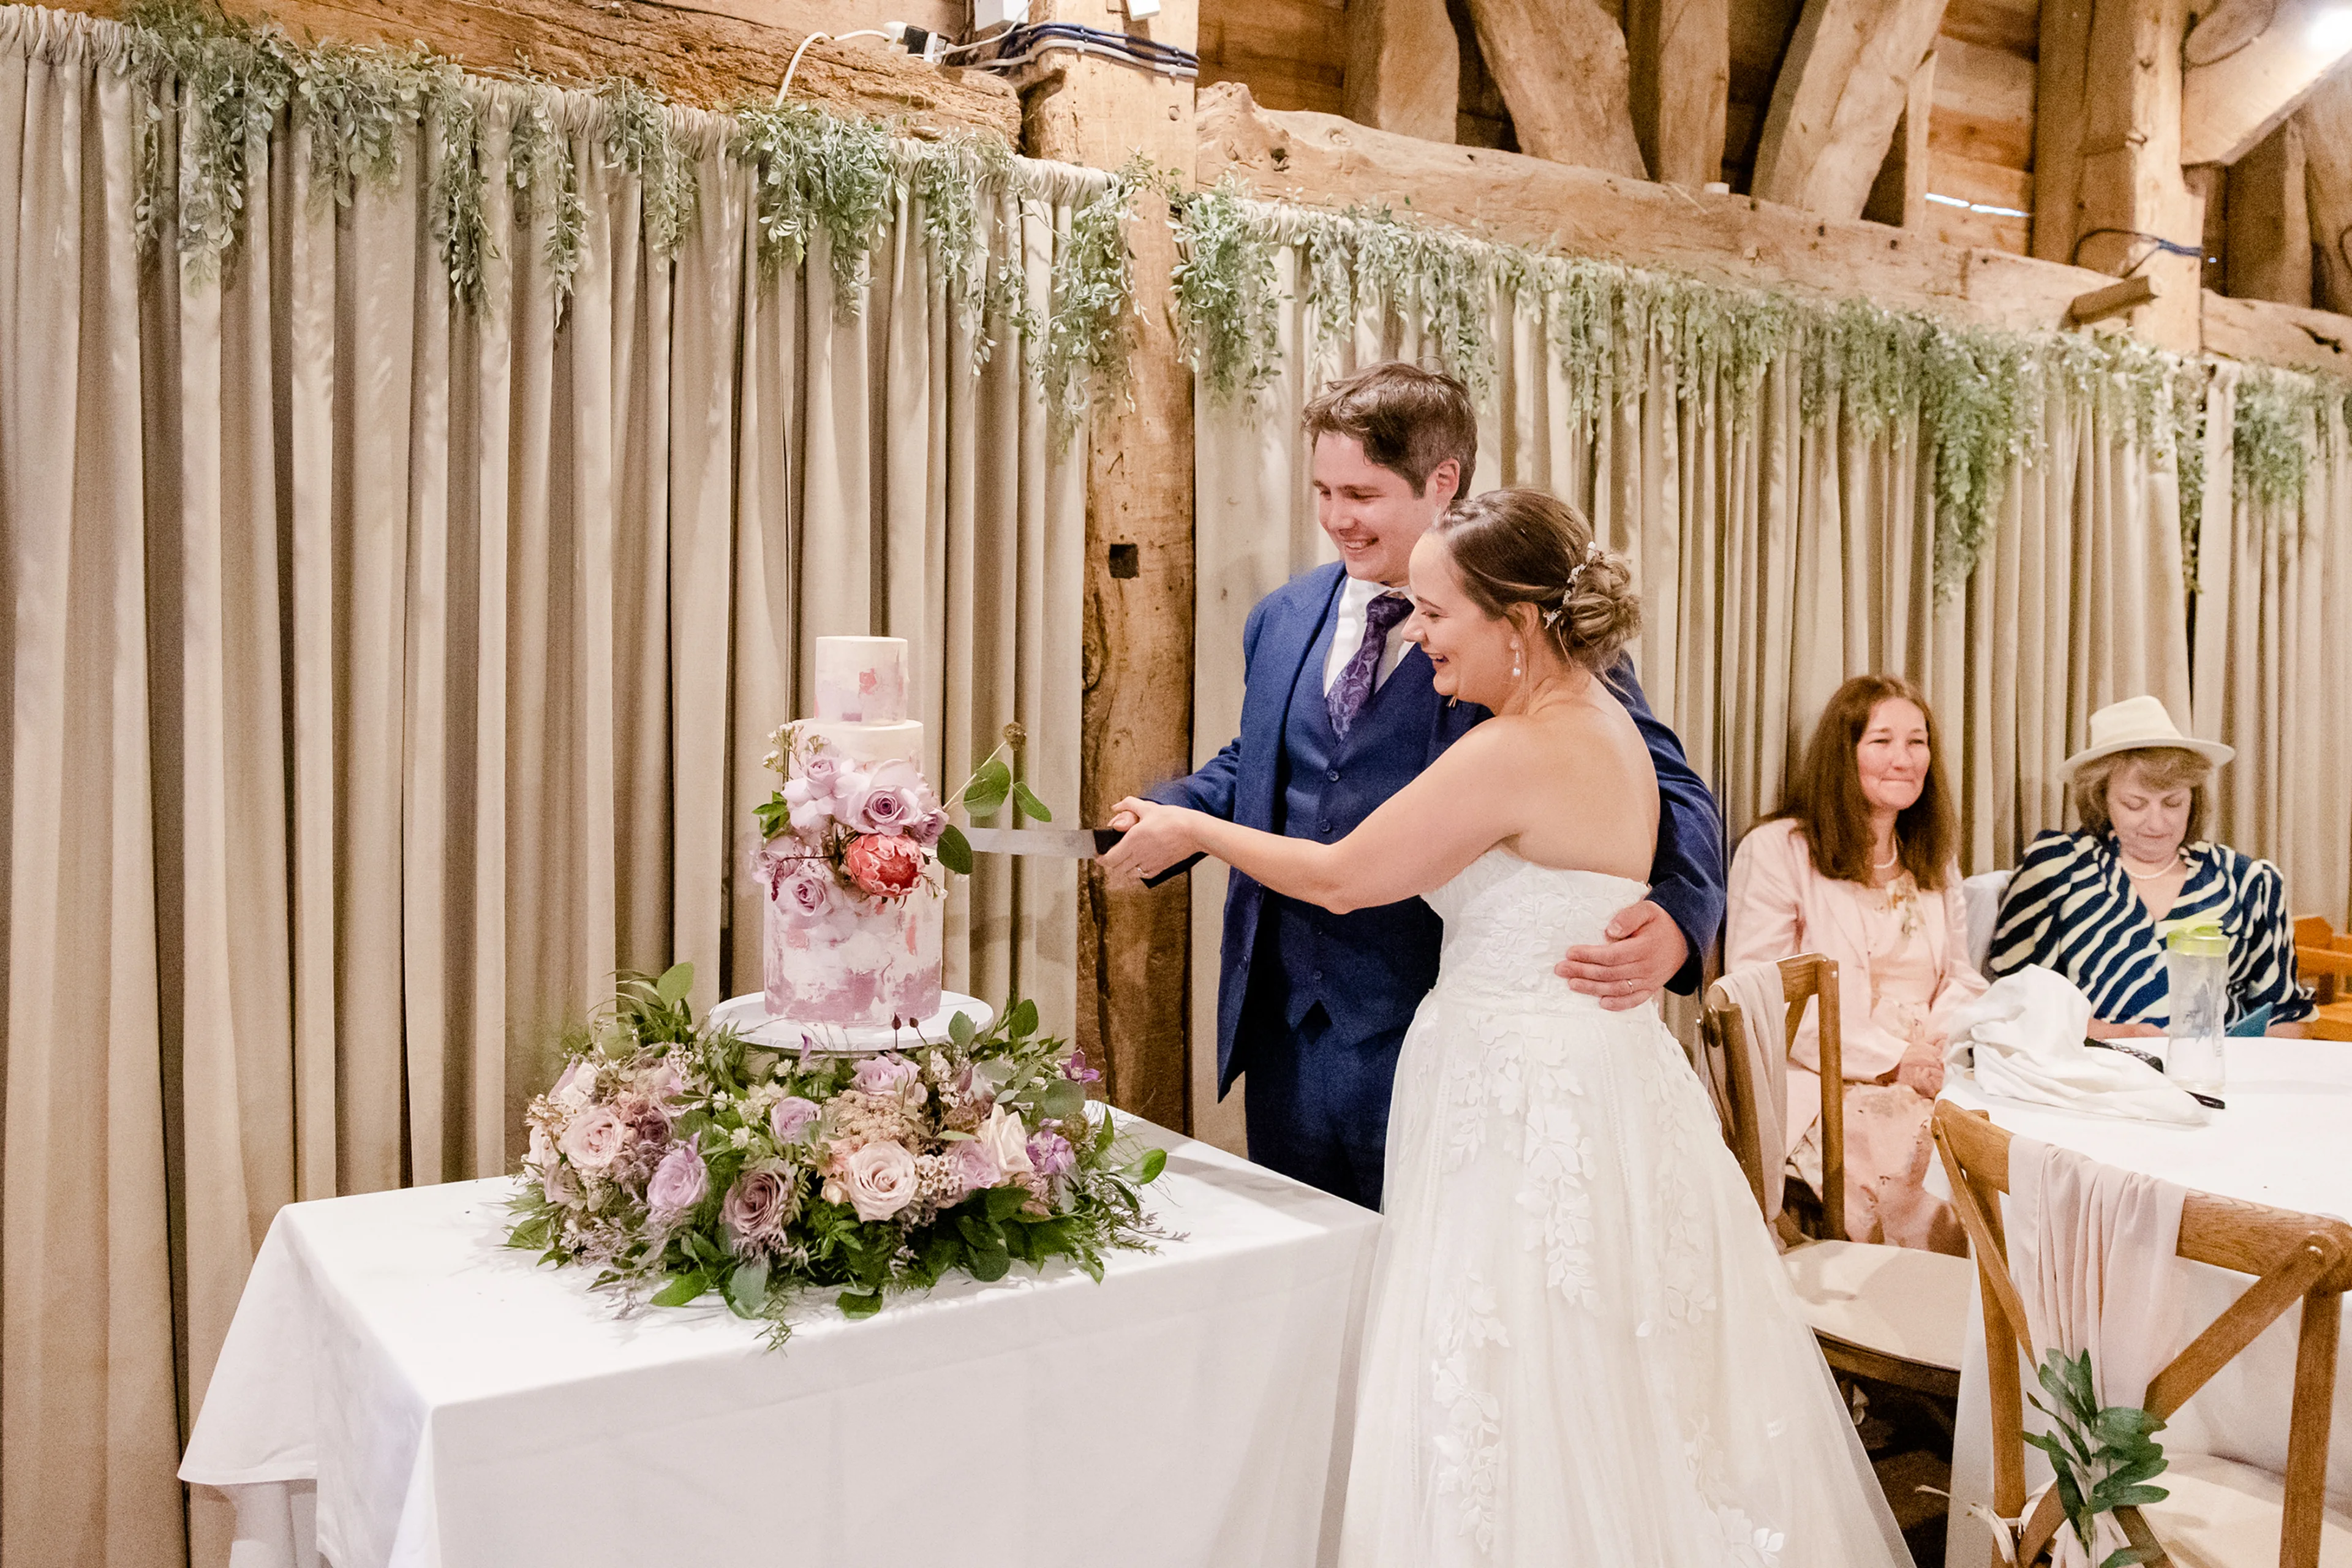 Couple Cutting Tree tier wedding cake in Mauve watercolour and floral arrangement with Protea flower and roses